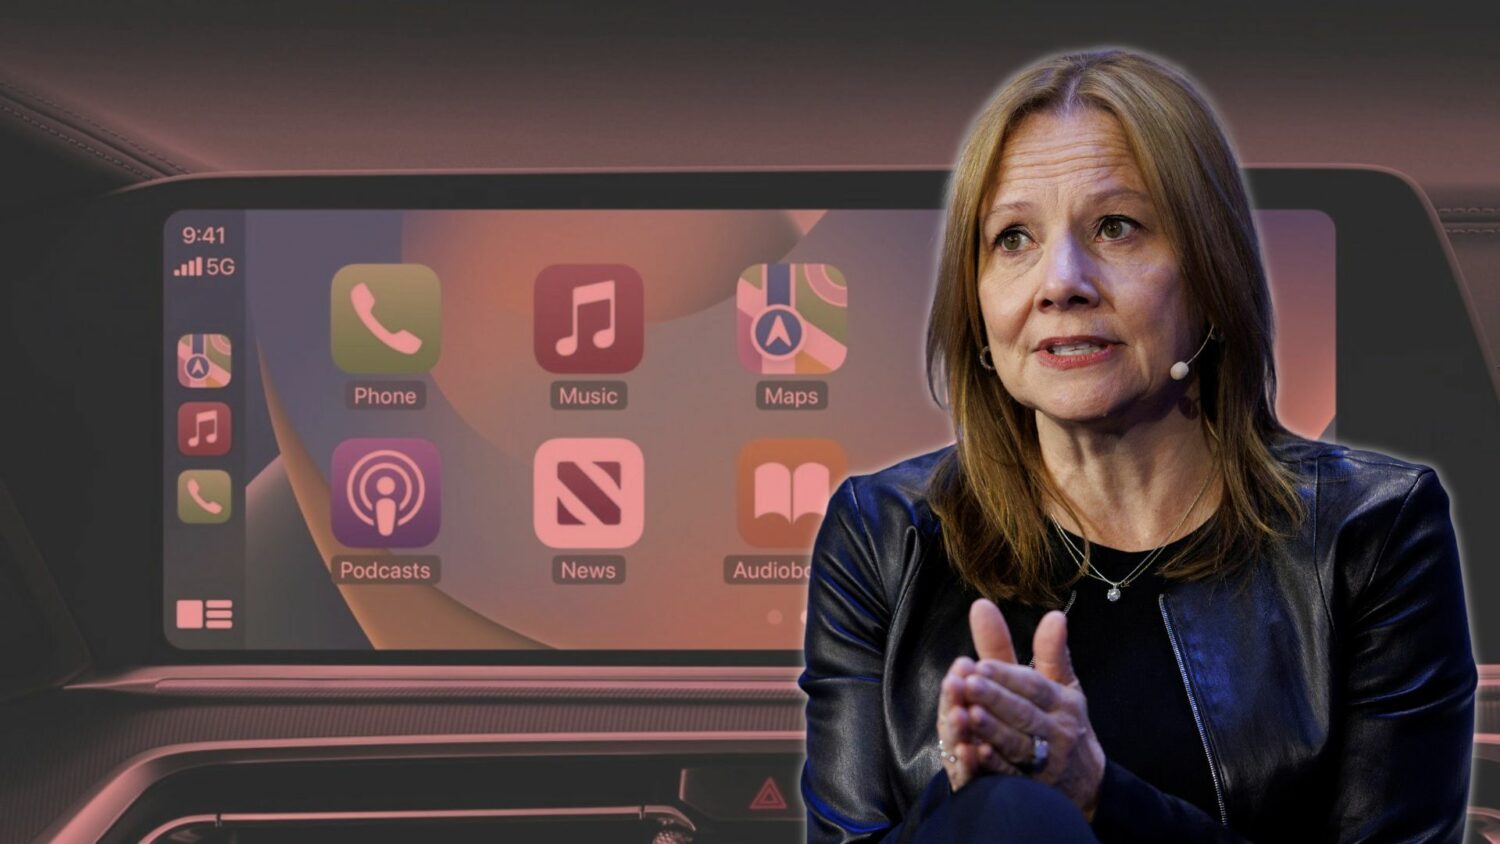 GM Drops Apple CarPlay And Android Auto Because They're Unsafe